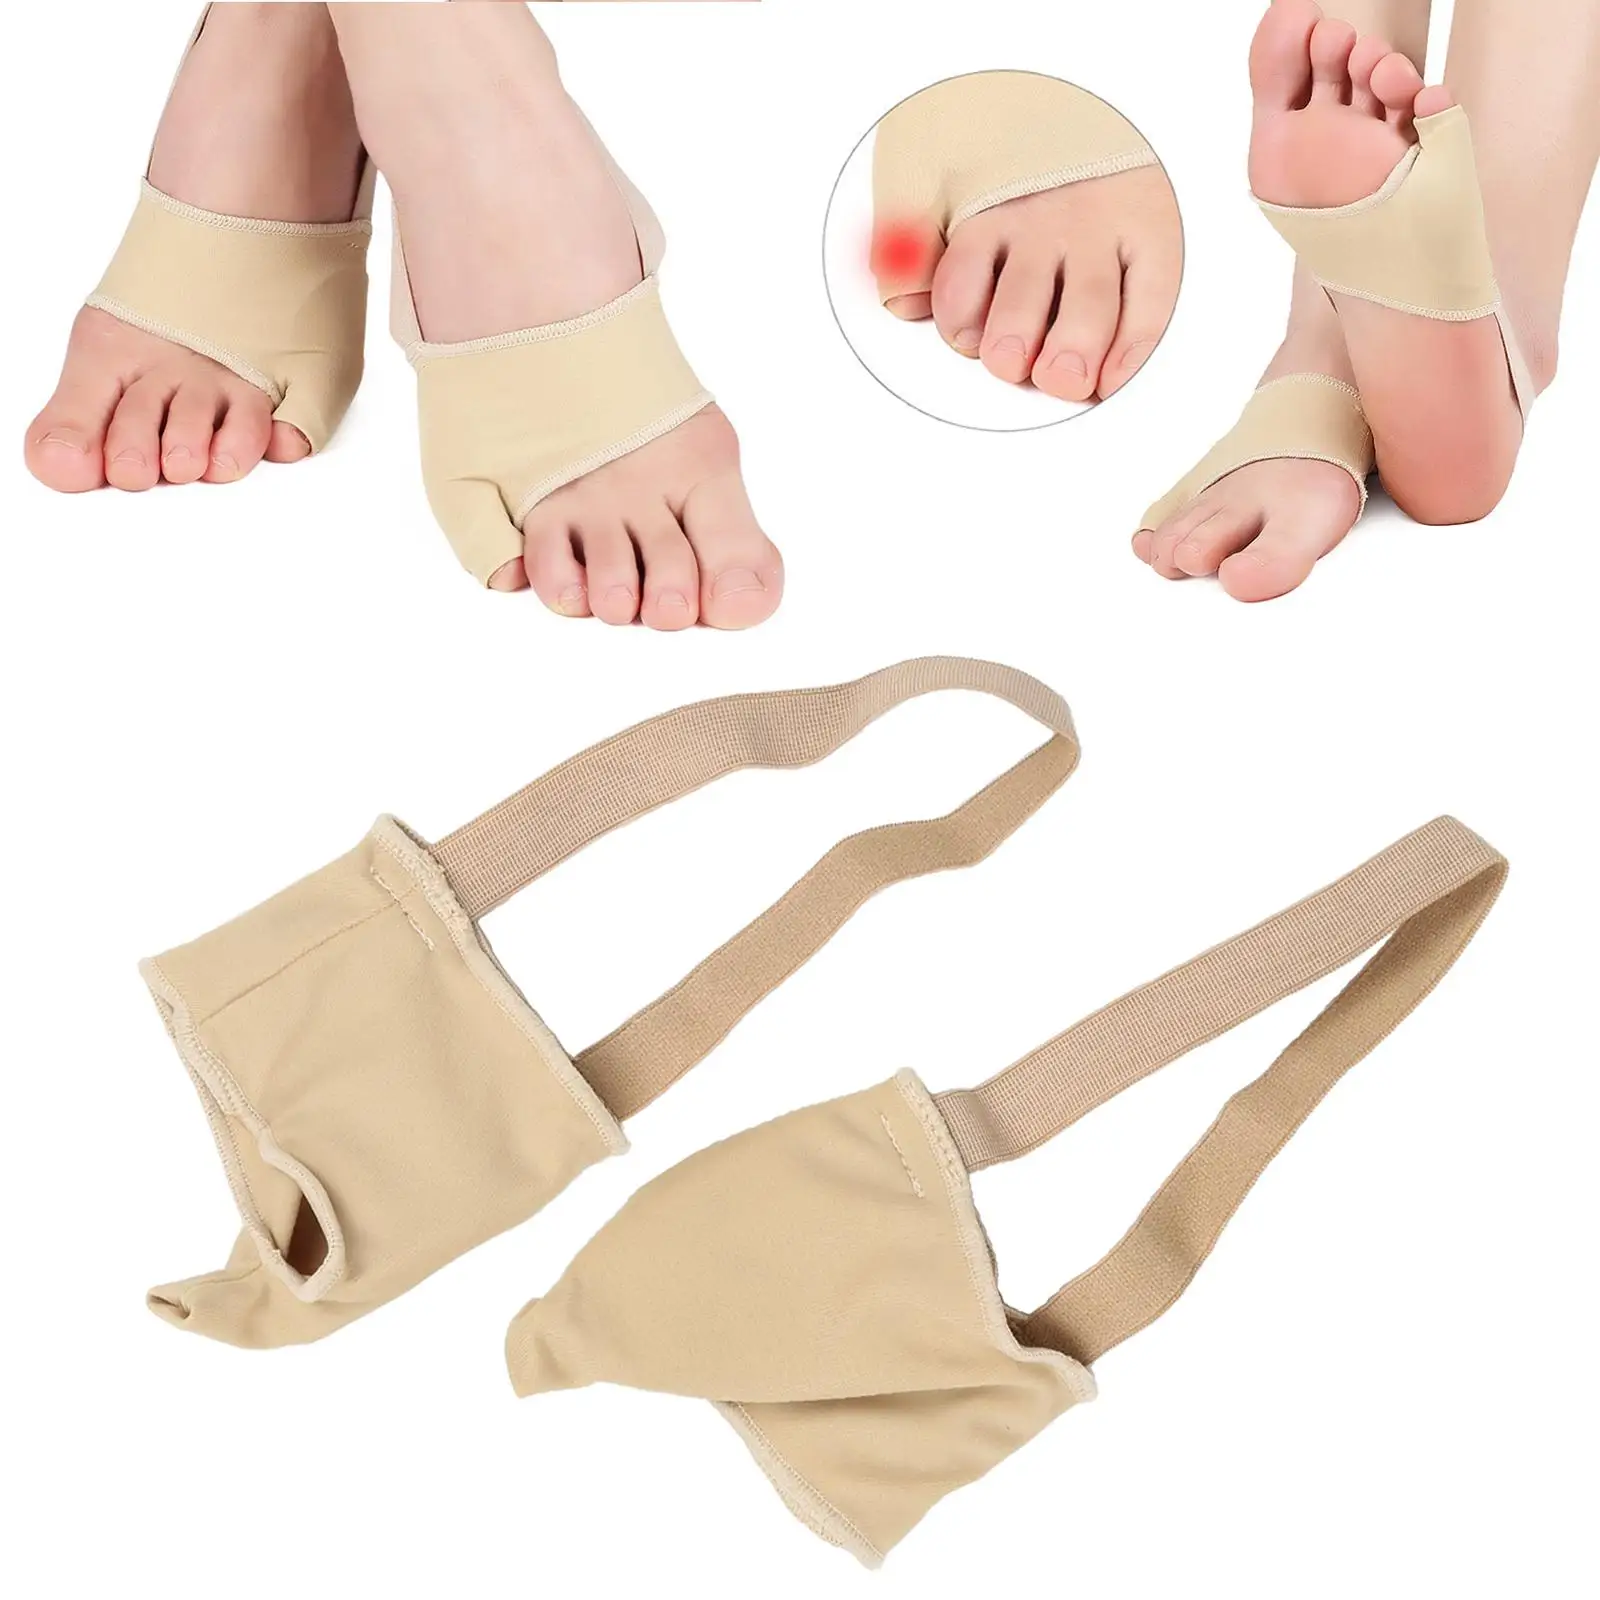 Tailor`S Toe Straightener Guard Little Toe Separator Protector for Hallux Valgus Bunion Soft Day Night Support Provides Padding